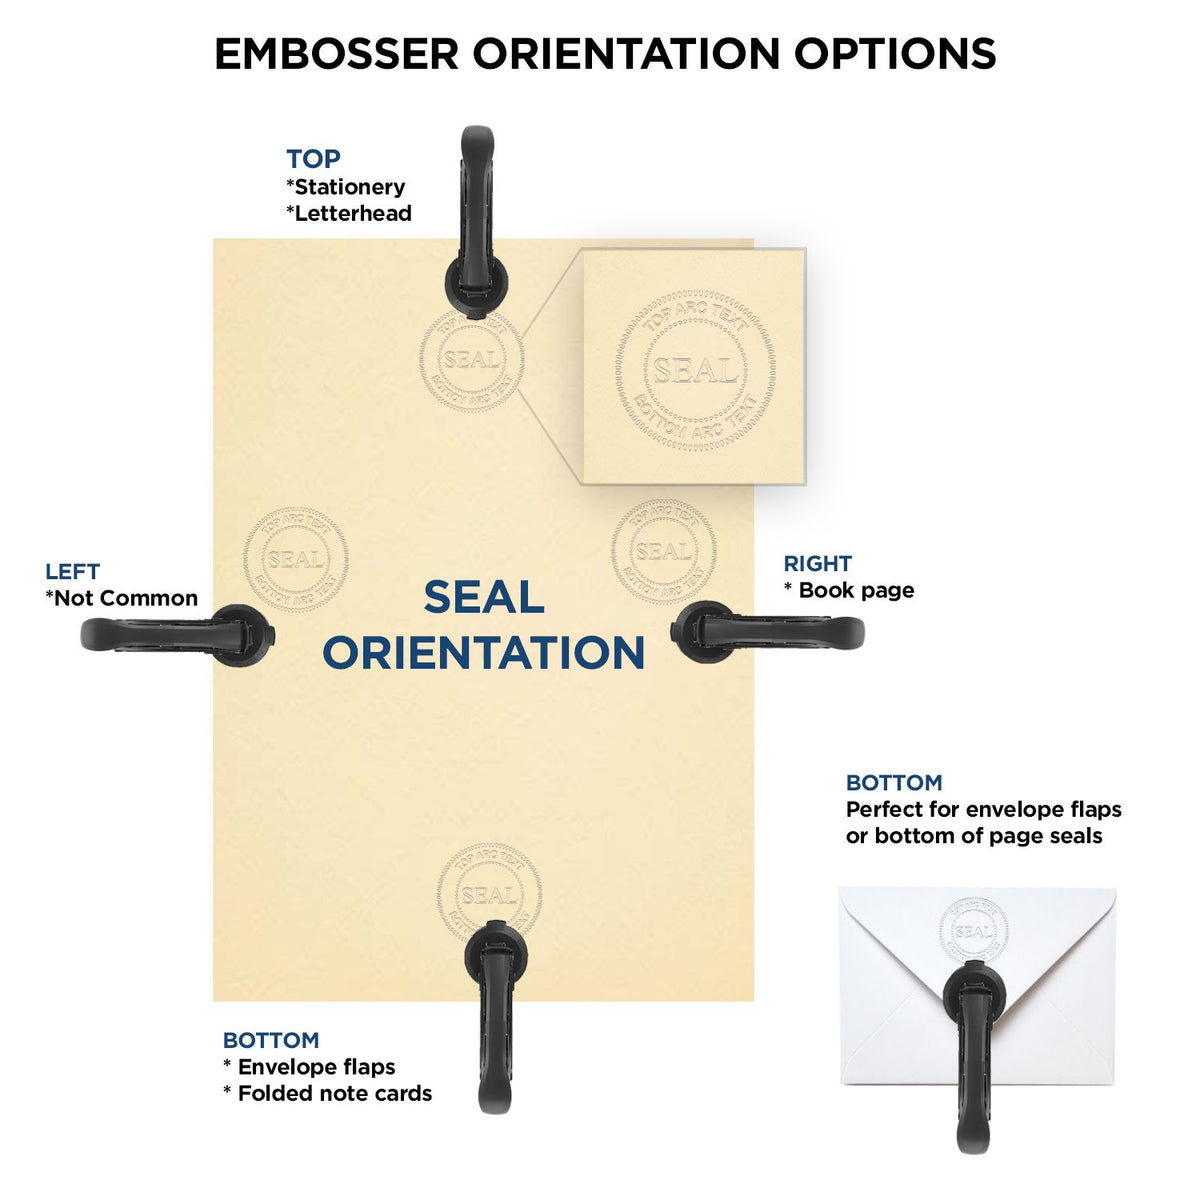 An infographic for the Gift New Hampshire Engineer Seal showing embosser orientation, this is showing examples of a top, bottom, right and left insert.